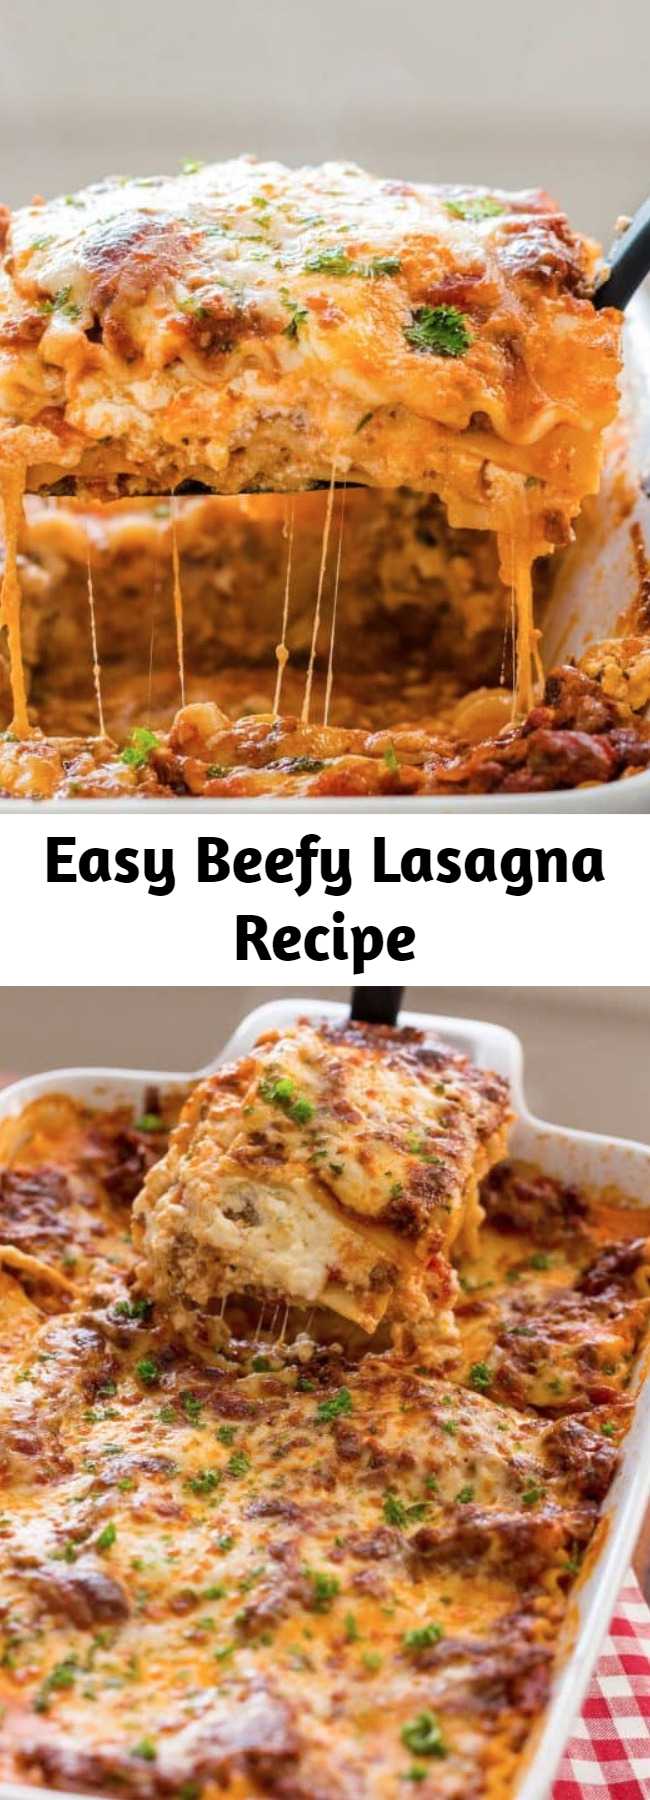 Easy Beefy Lasagna Recipe - This 3 cheese EASY Lasagna recipe is beefy, saucy and supremely flavorful. This homemade lasagna is better than any restaurant version and it feeds a crowd! #lasagna #homemadelasagna #lasagnarecipe #pasta #casserole #dinner